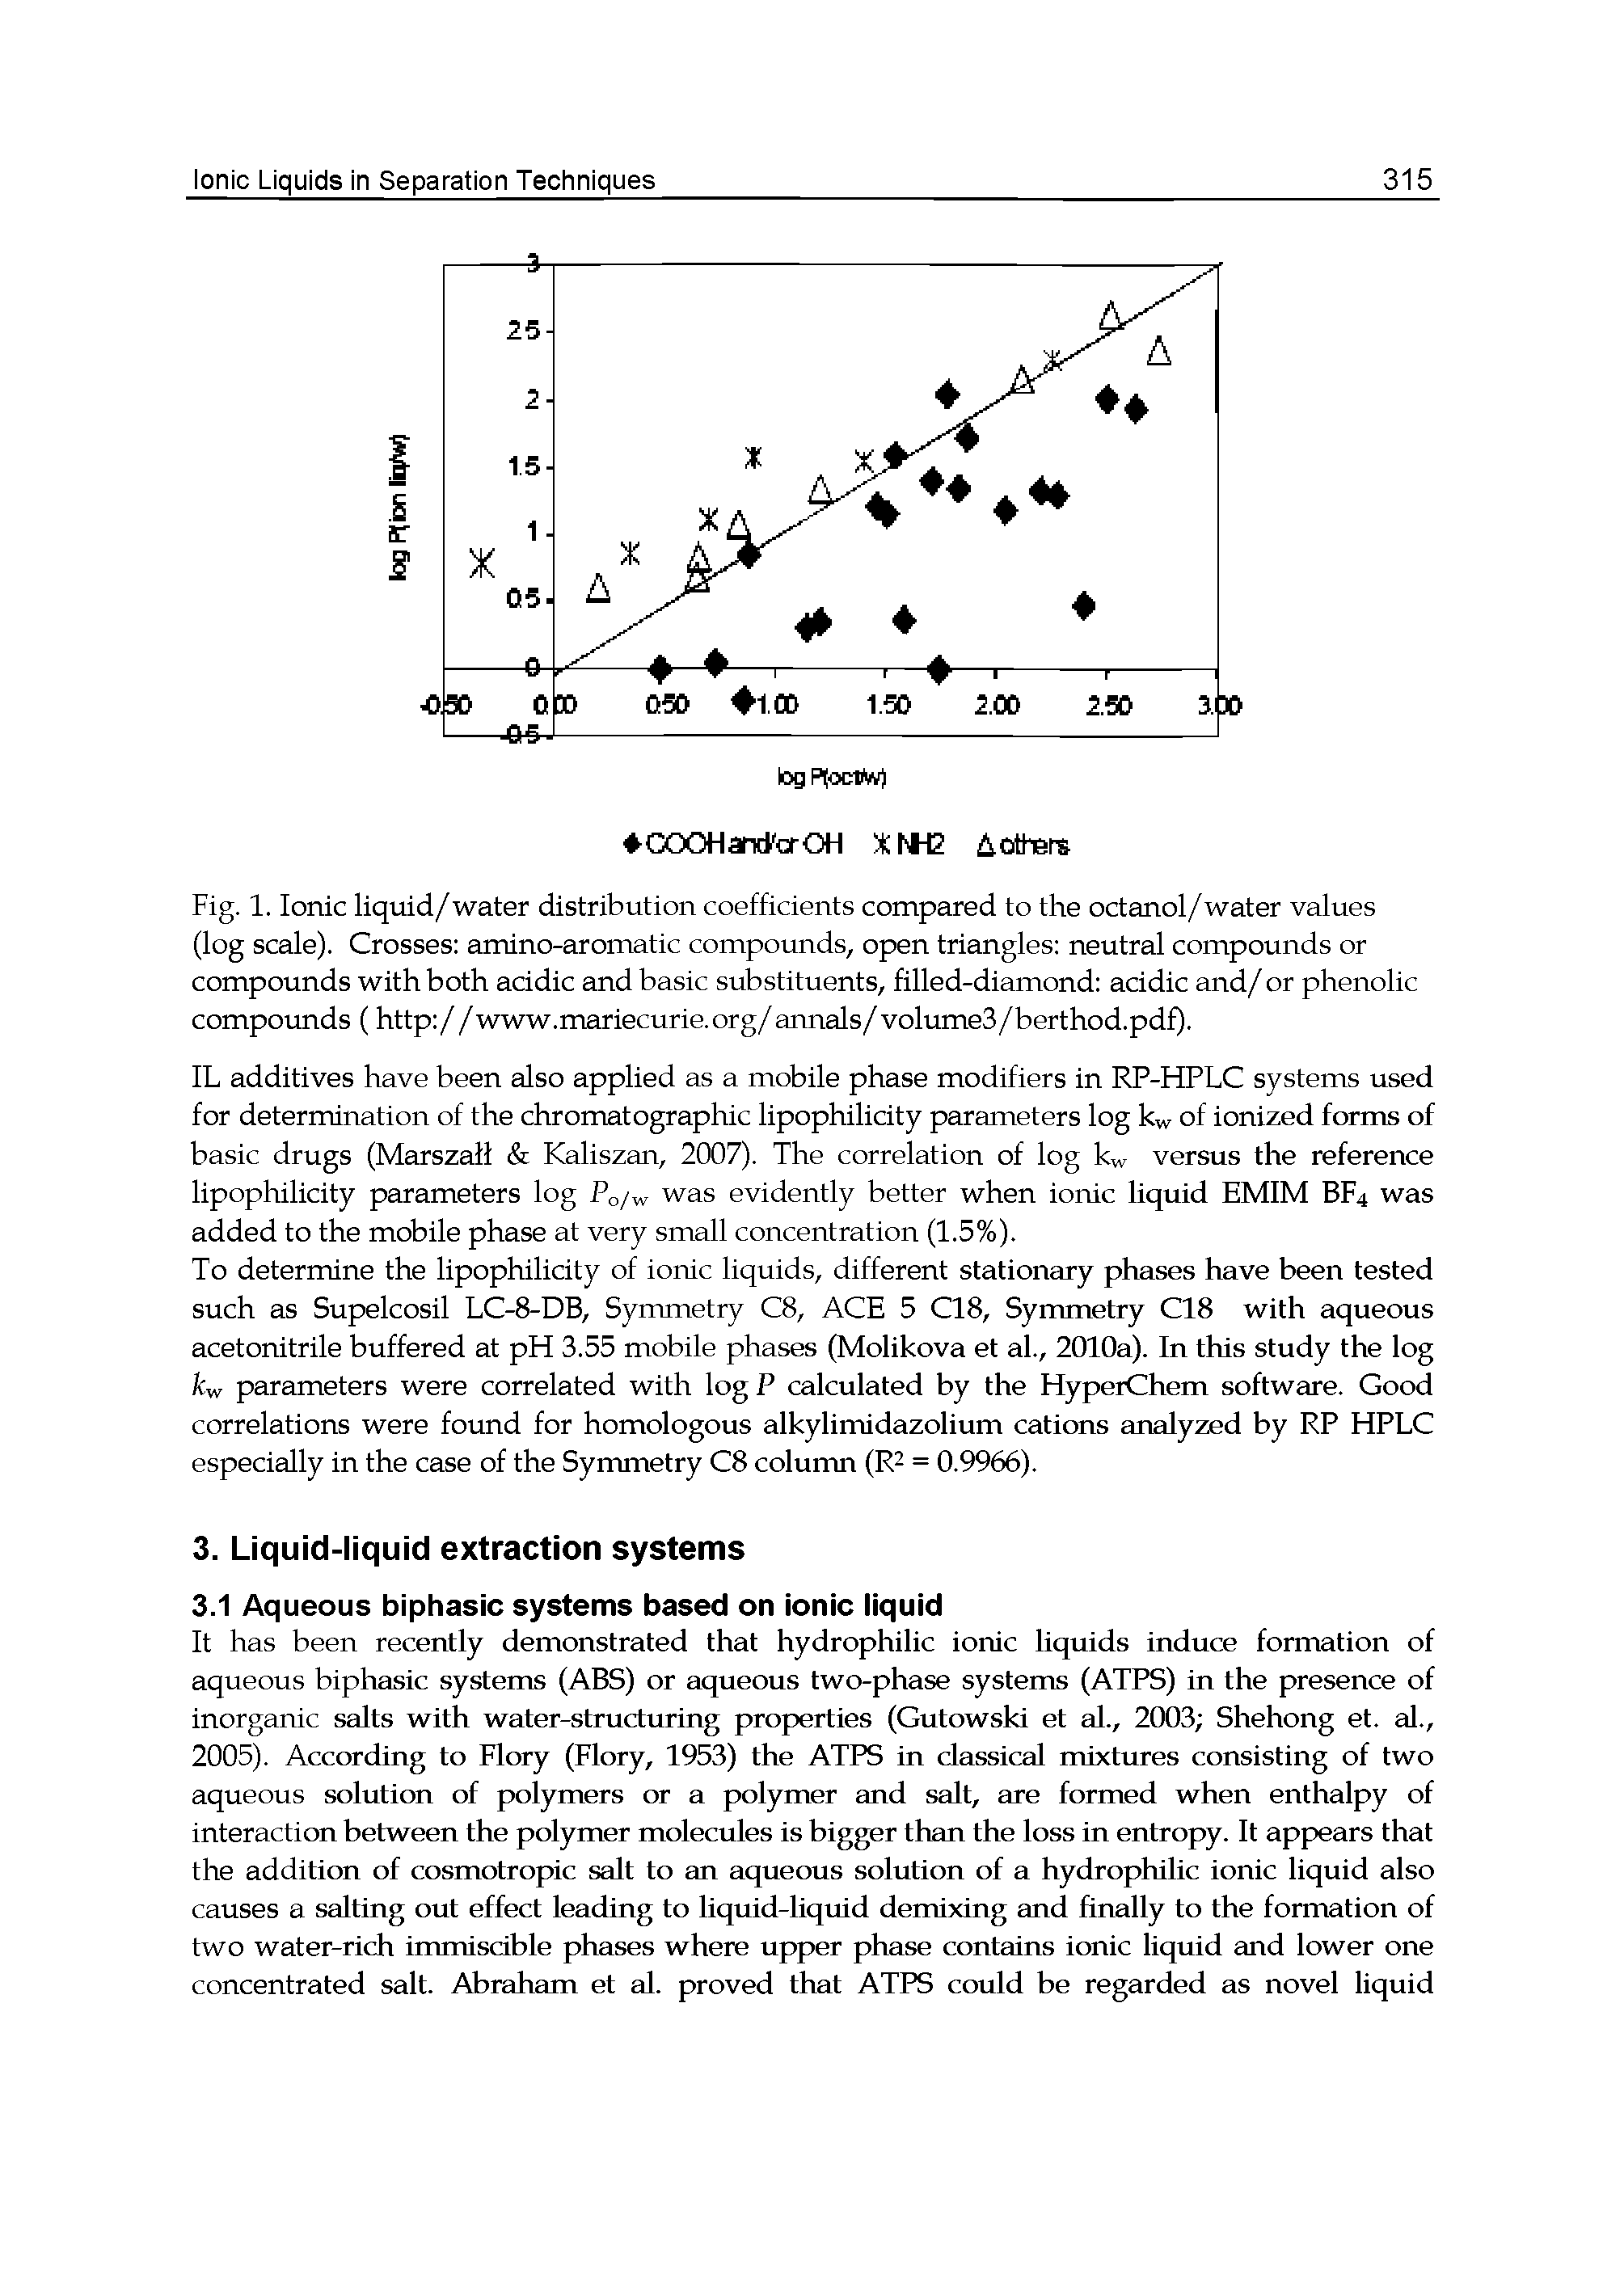 Fig. 1. Ionic liquid/water distribution coefficients compared to the octanol/water values (log scale). Crosses amino-aromatic compoimds, open triangles neutral compounds or compounds with both acidic and basic substituents, filled-diamond acidic and/or phenolic compounds ( http //www.mariecurie.org/annals/volumeS/berthod.pdf).